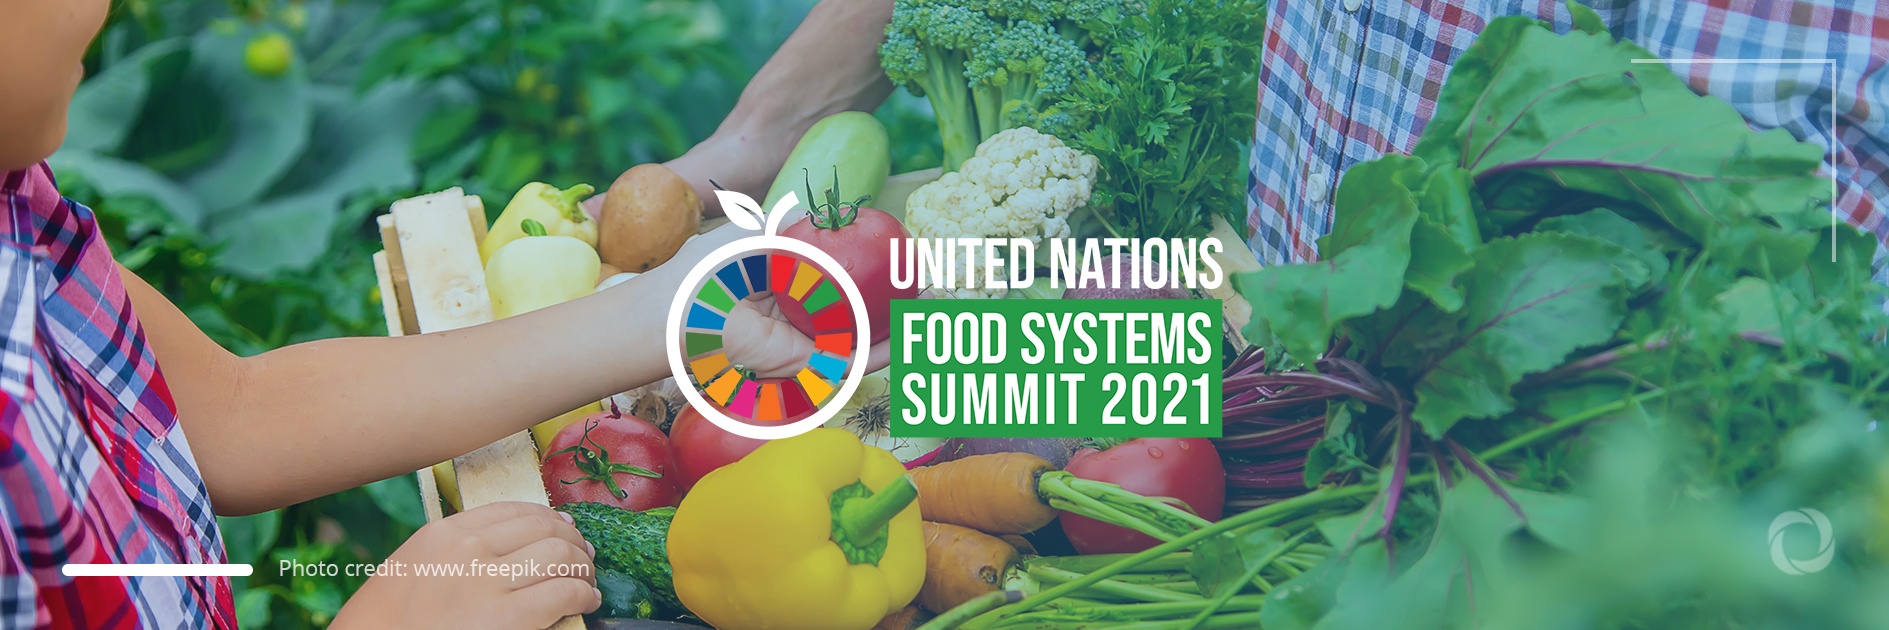 UN Food Systems Summit needs world experts for just and sustainable food systems